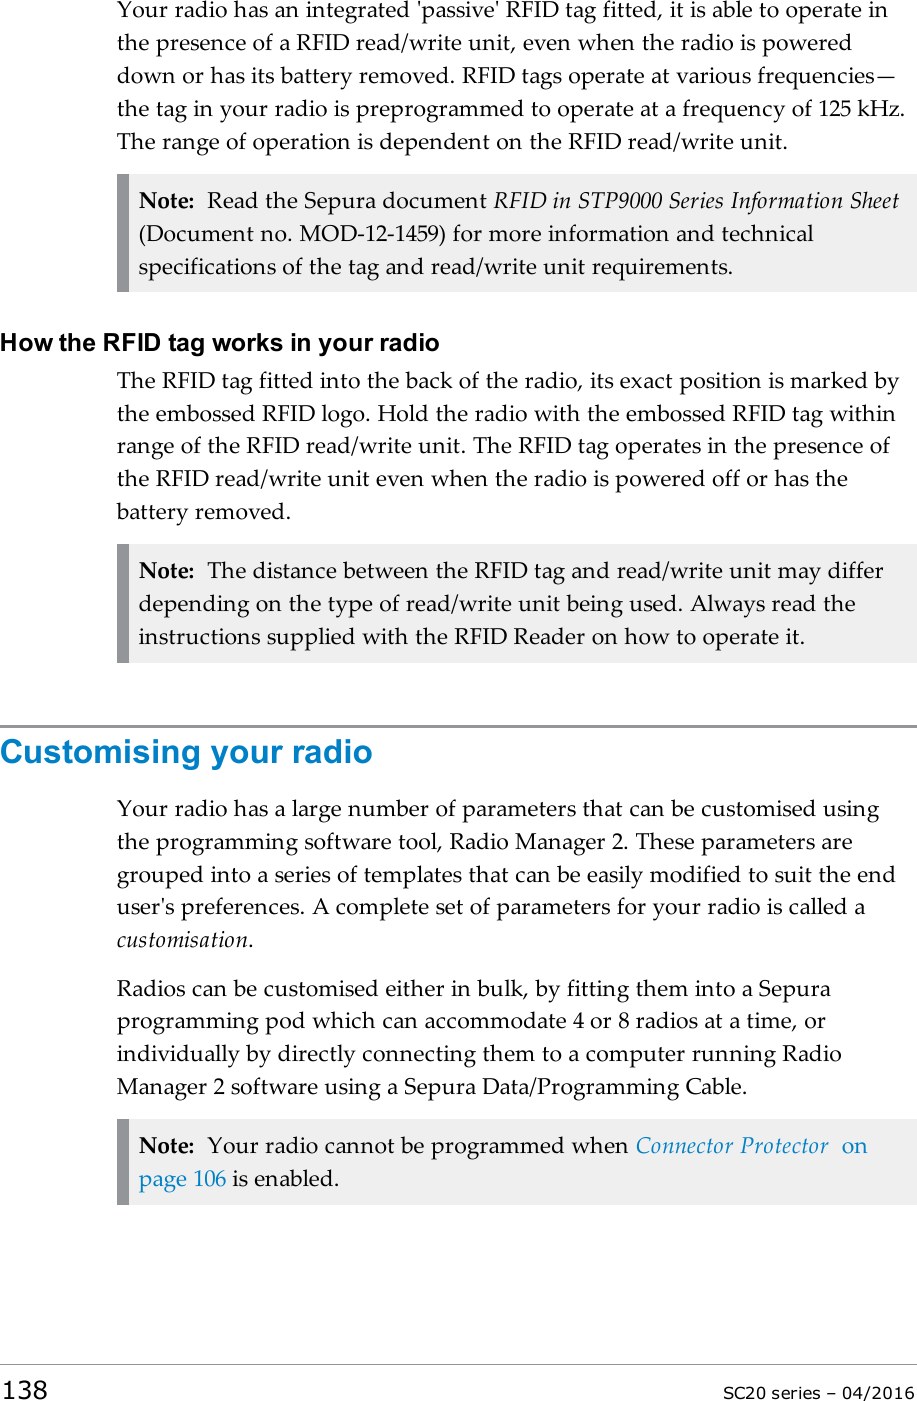 Your radio has an integrated &apos;passive&apos; RFID tag fitted, it is able to operate inthe presence of a RFID read/write unit, even when the radio is powereddown or has its battery removed. RFID tags operate at various frequencies—the tag in your radio is preprogrammed to operate at a frequency of 125 kHz.The range of operation is dependent on the RFID read/write unit.Note: Read the Sepura document RFID in STP9000 Series Information Sheet(Document no. MOD-12-1459) for more information and technicalspecifications of the tag and read/write unit requirements.How the RFID tag works in your radioThe RFID tag fitted into the back of the radio, its exact position is marked bythe embossed RFID logo. Hold the radio with the embossed RFIDtag withinrange of the RFID read/write unit. The RFID tag operates in the presence ofthe RFID read/write unit even when the radio is powered off or has thebattery removed.Note: The distance between the RFID tag and read/write unit may differdepending on the type of read/write unit being used. Always read theinstructions supplied with the RFIDReader on how to operate it.Customising your radioYour radio has a large number of parameters that can be customised usingthe programming software tool, Radio Manager 2. These parameters aregrouped into a series of templates that can be easily modified to suit the enduser&apos;s preferences. A complete set of parameters for your radio is called acustomisation.Radios can be customised either in bulk, by fitting them into a Sepuraprogramming pod which can accommodate 4 or 8 radios at a time, orindividually by directly connecting them to a computer running RadioManager 2 software using a Sepura Data/Programming Cable.Note: Your radio cannot be programmed when Connector Protector onpage 106 is enabled.138 SC20 series – 04/2016